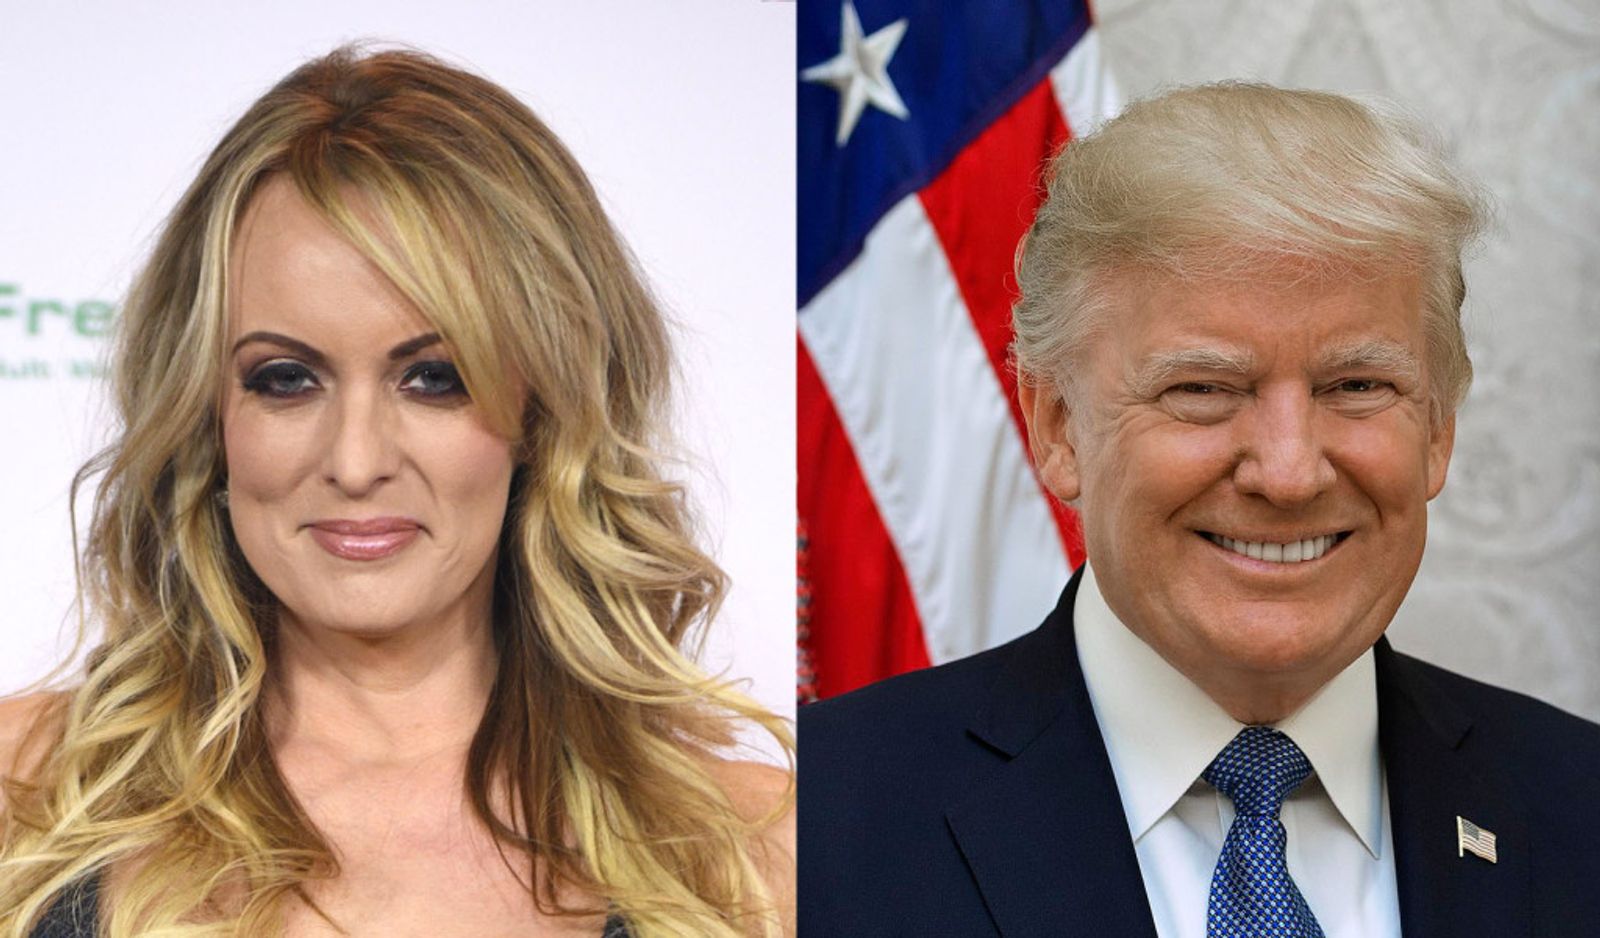 Stormy Daniels May Have Video, Pics Of Donald Trump From Affair